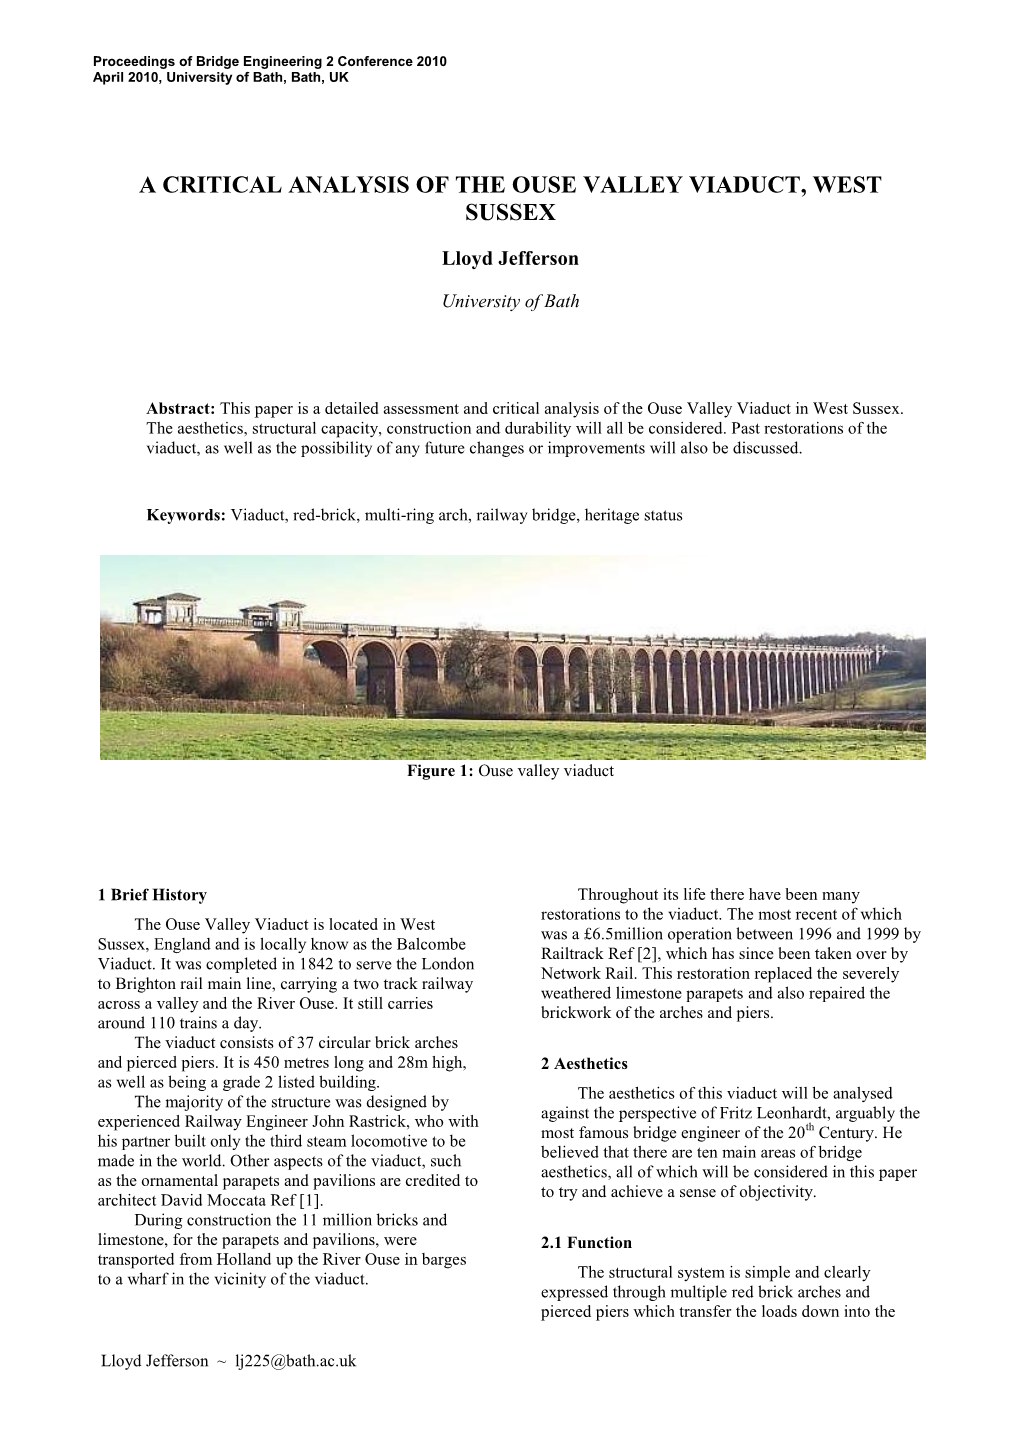 A Critical Analysis of the Ouse Valley Viaduct, West Sussex